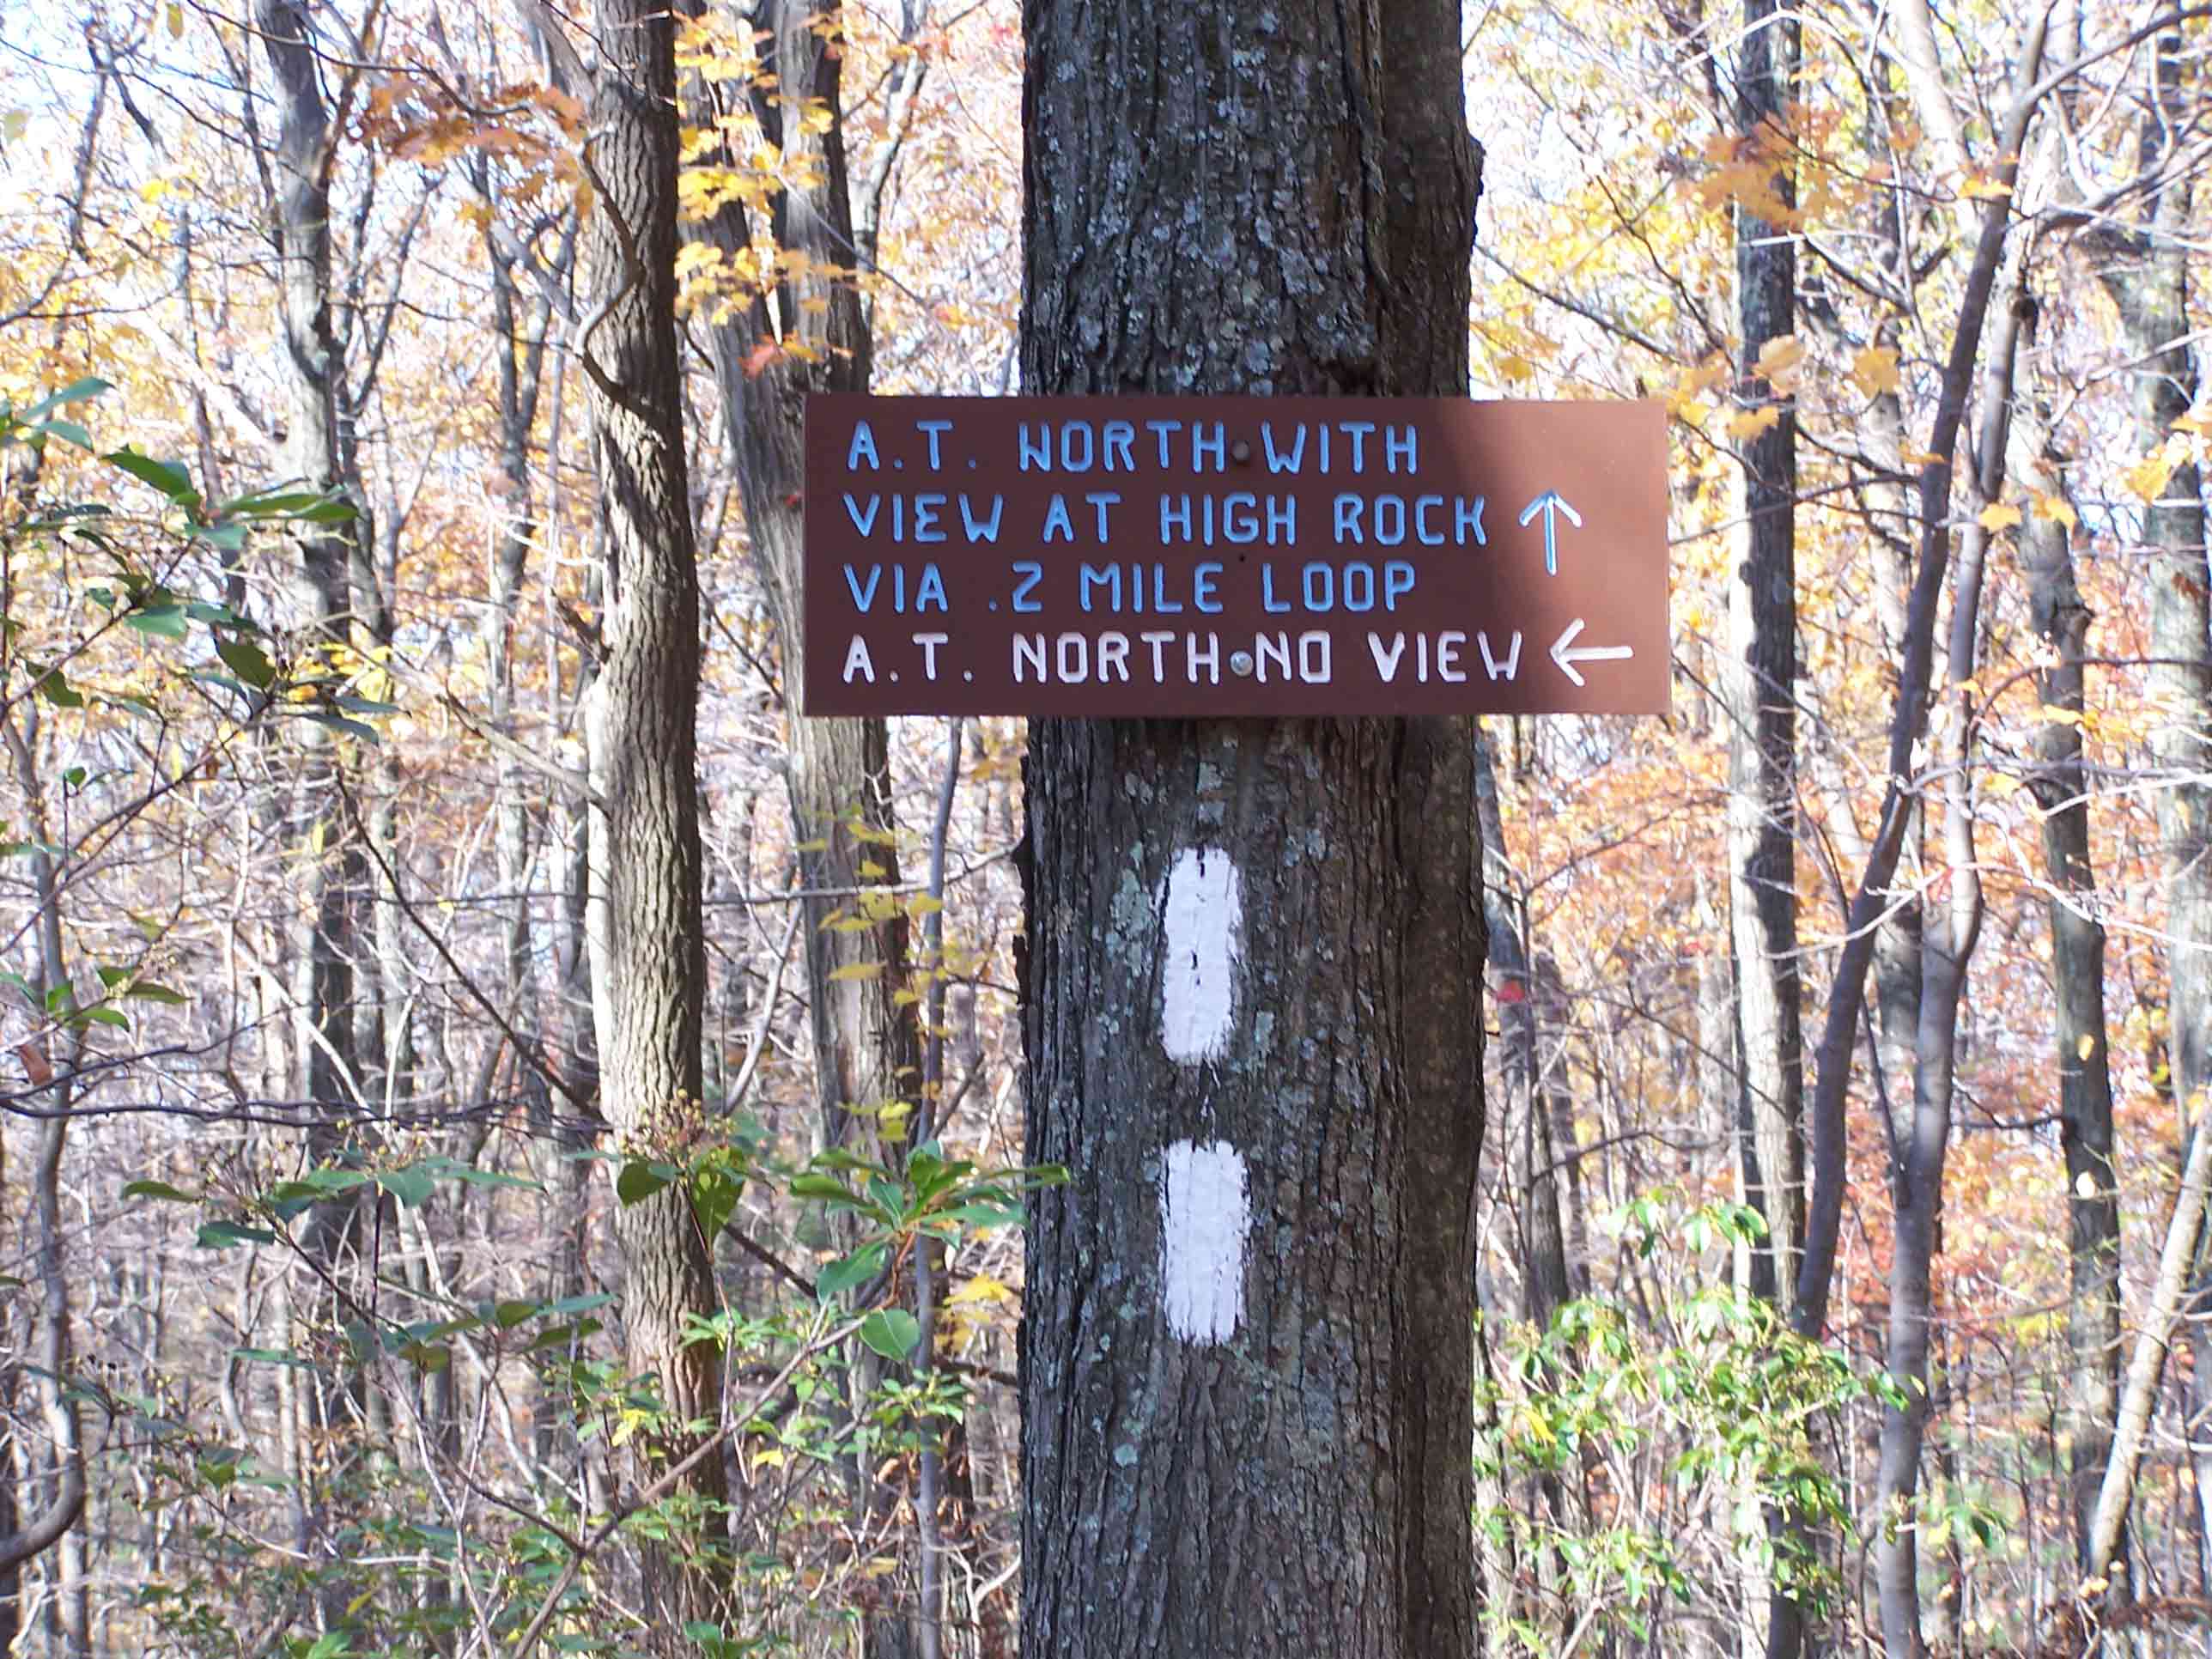 mm 3.2 - Sign for blue-blazed High Rock loop trail (southern entry). Courtesy at@rohland.org